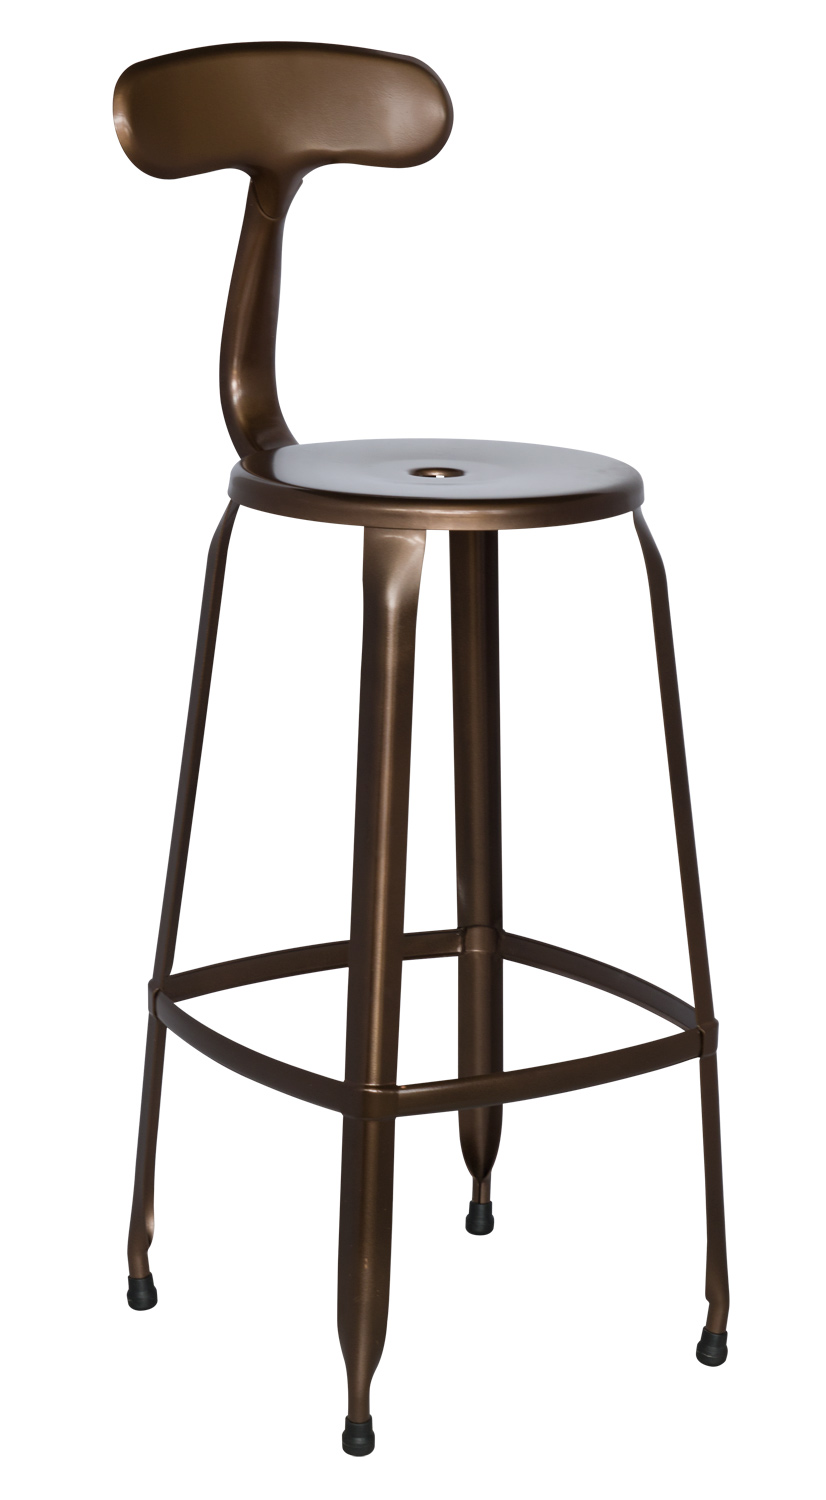 Chintaly Imports 8035 Galvanized Steel Bar Stool - Red Copper